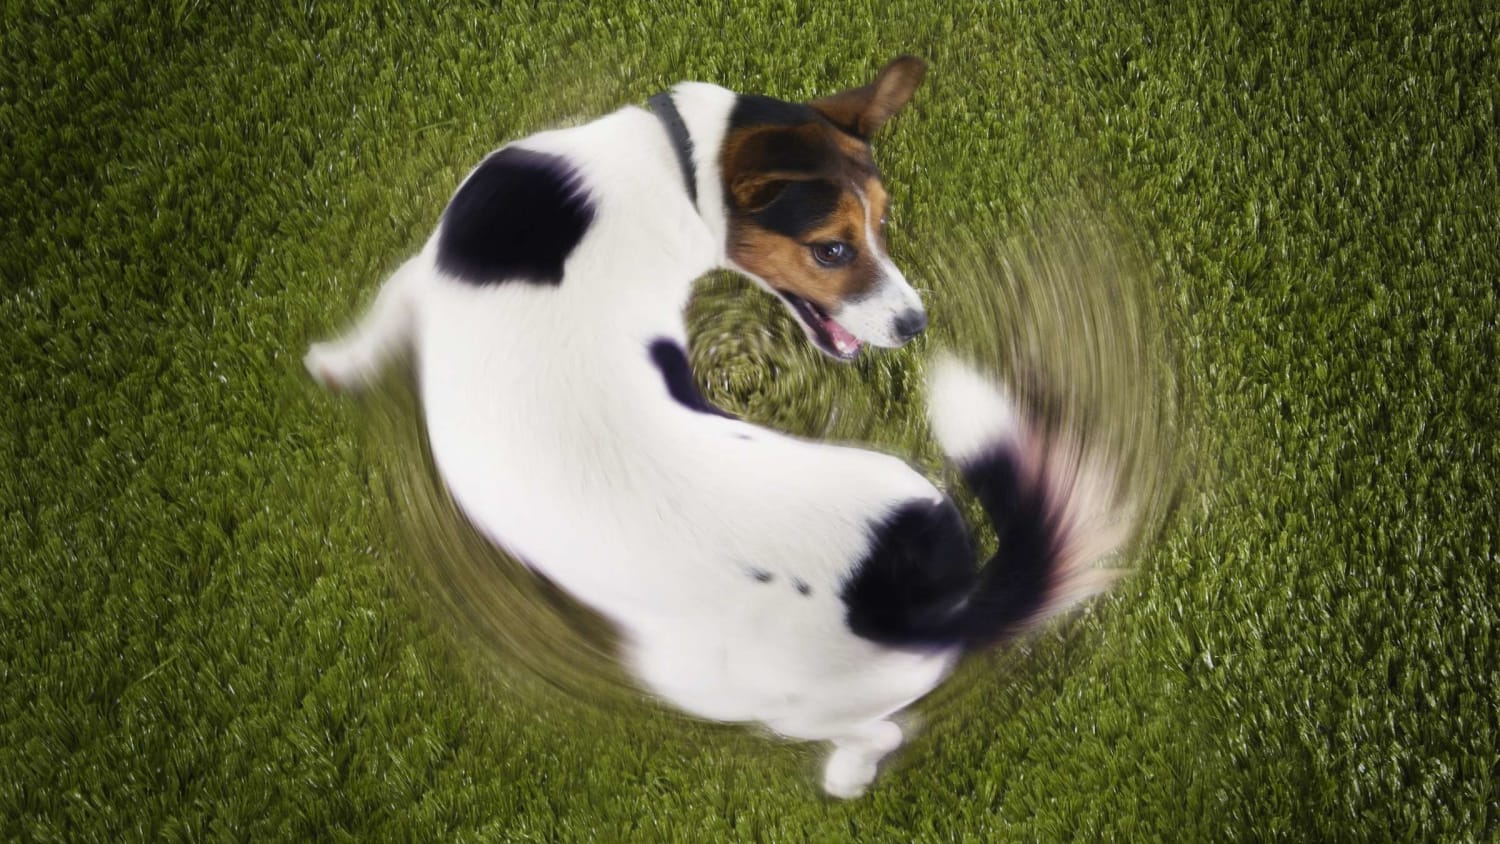 Why Do Dogs Chase Their Tails?